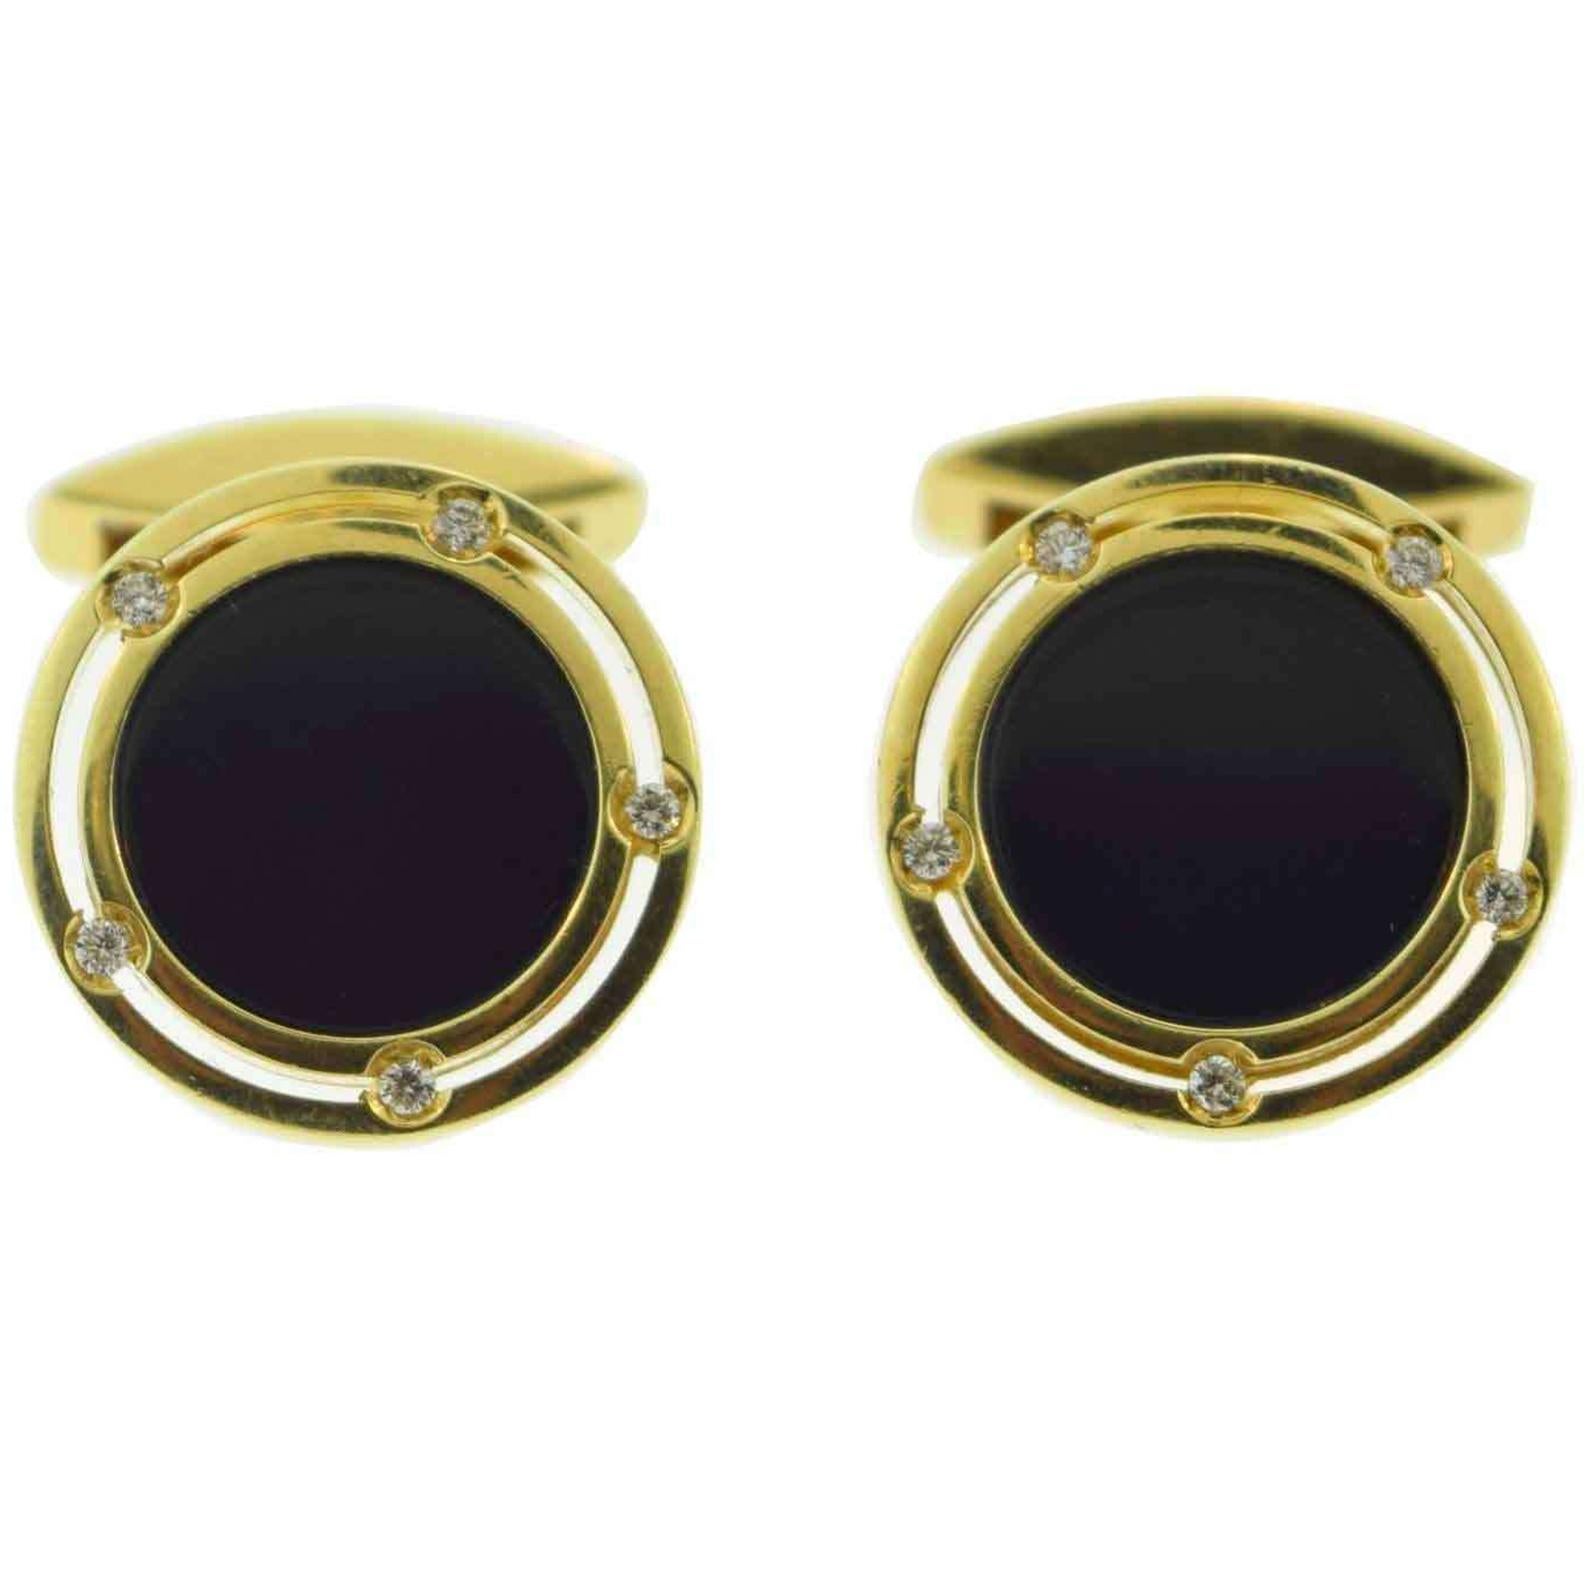 Damiani Signed Onyx and Diamond 18 Karat Yellow Gold Cufflinks In Good Condition For Sale In Miami, FL